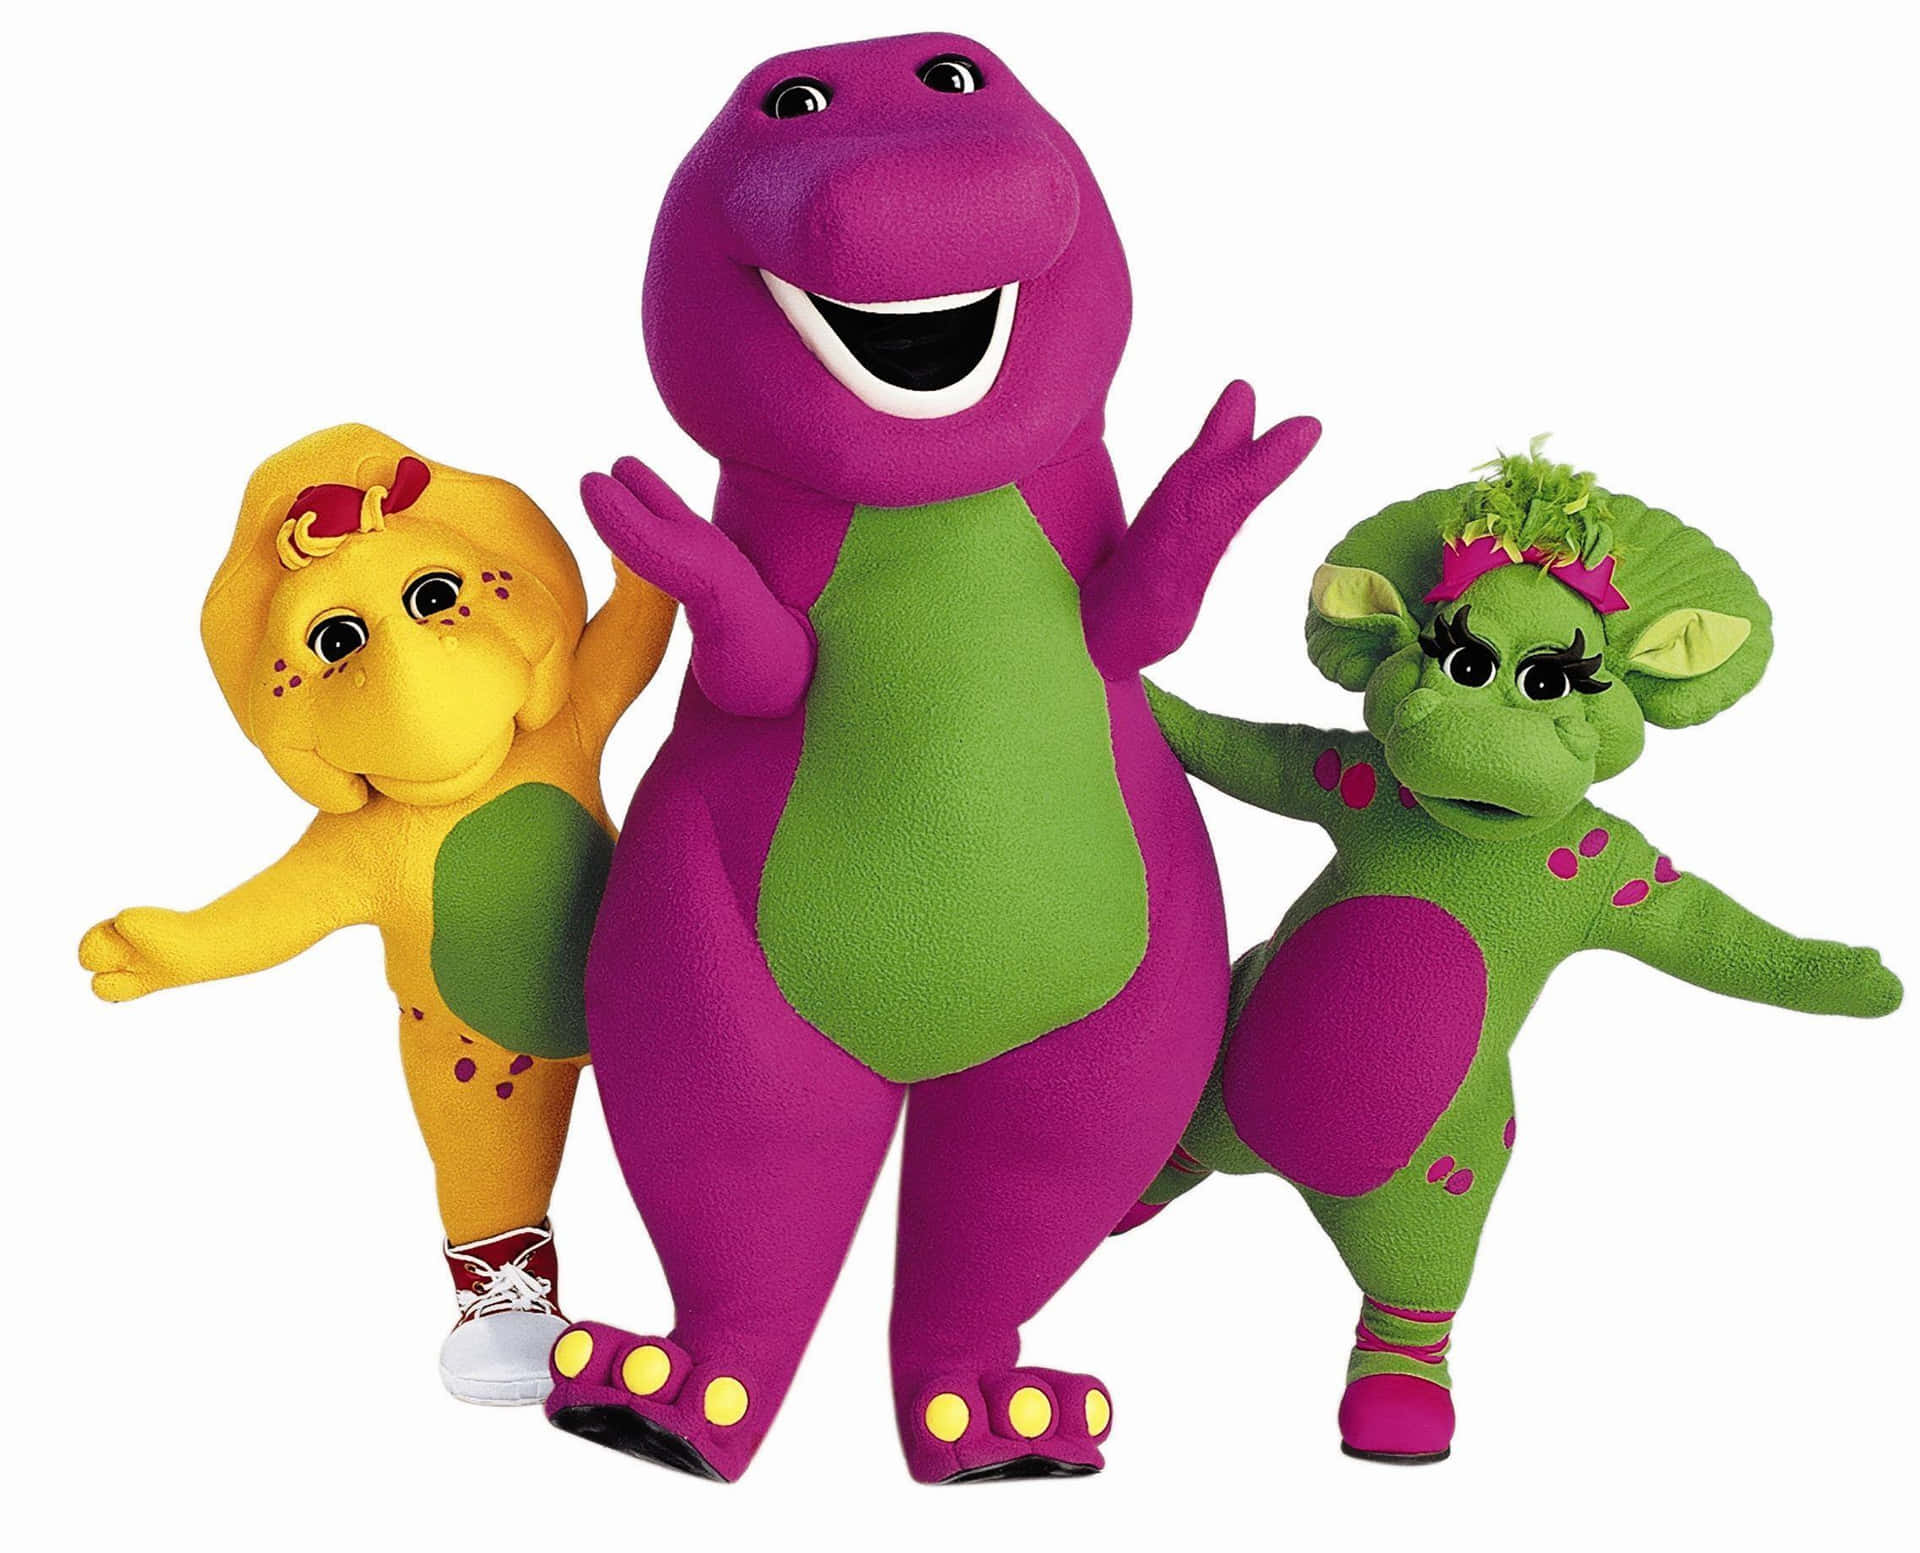 Barney the Dinosaur in a colorful, fun-filled background Wallpaper